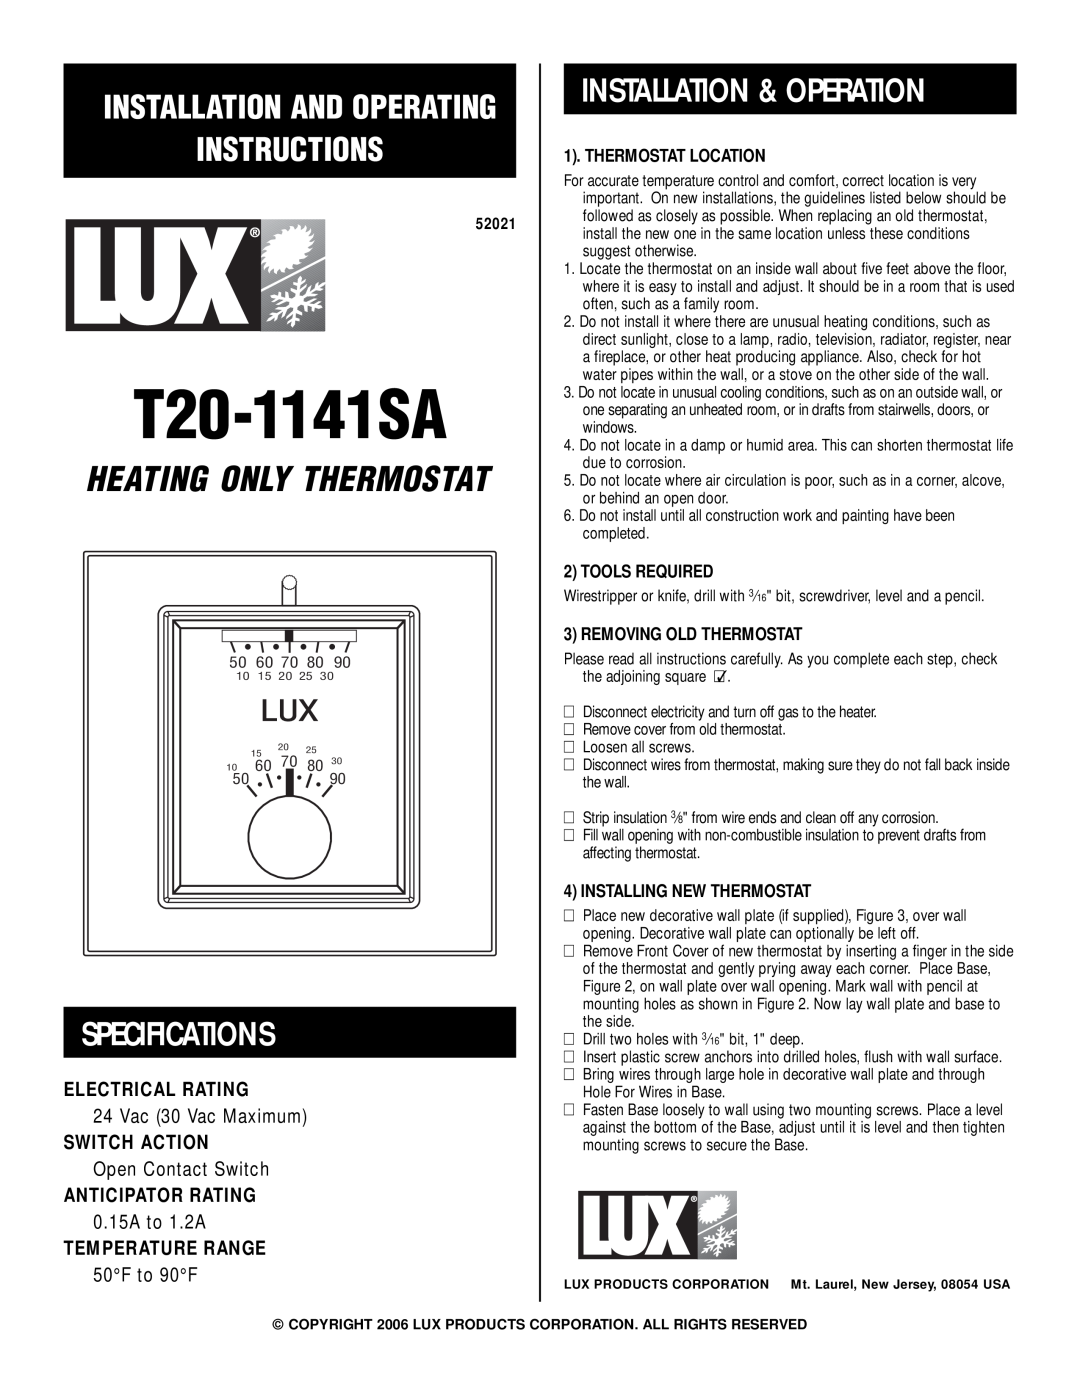 Lux Products T20-1141SA specifications Specifications, Installation & Operation, Electrical Rating, Switch Action, 52021 